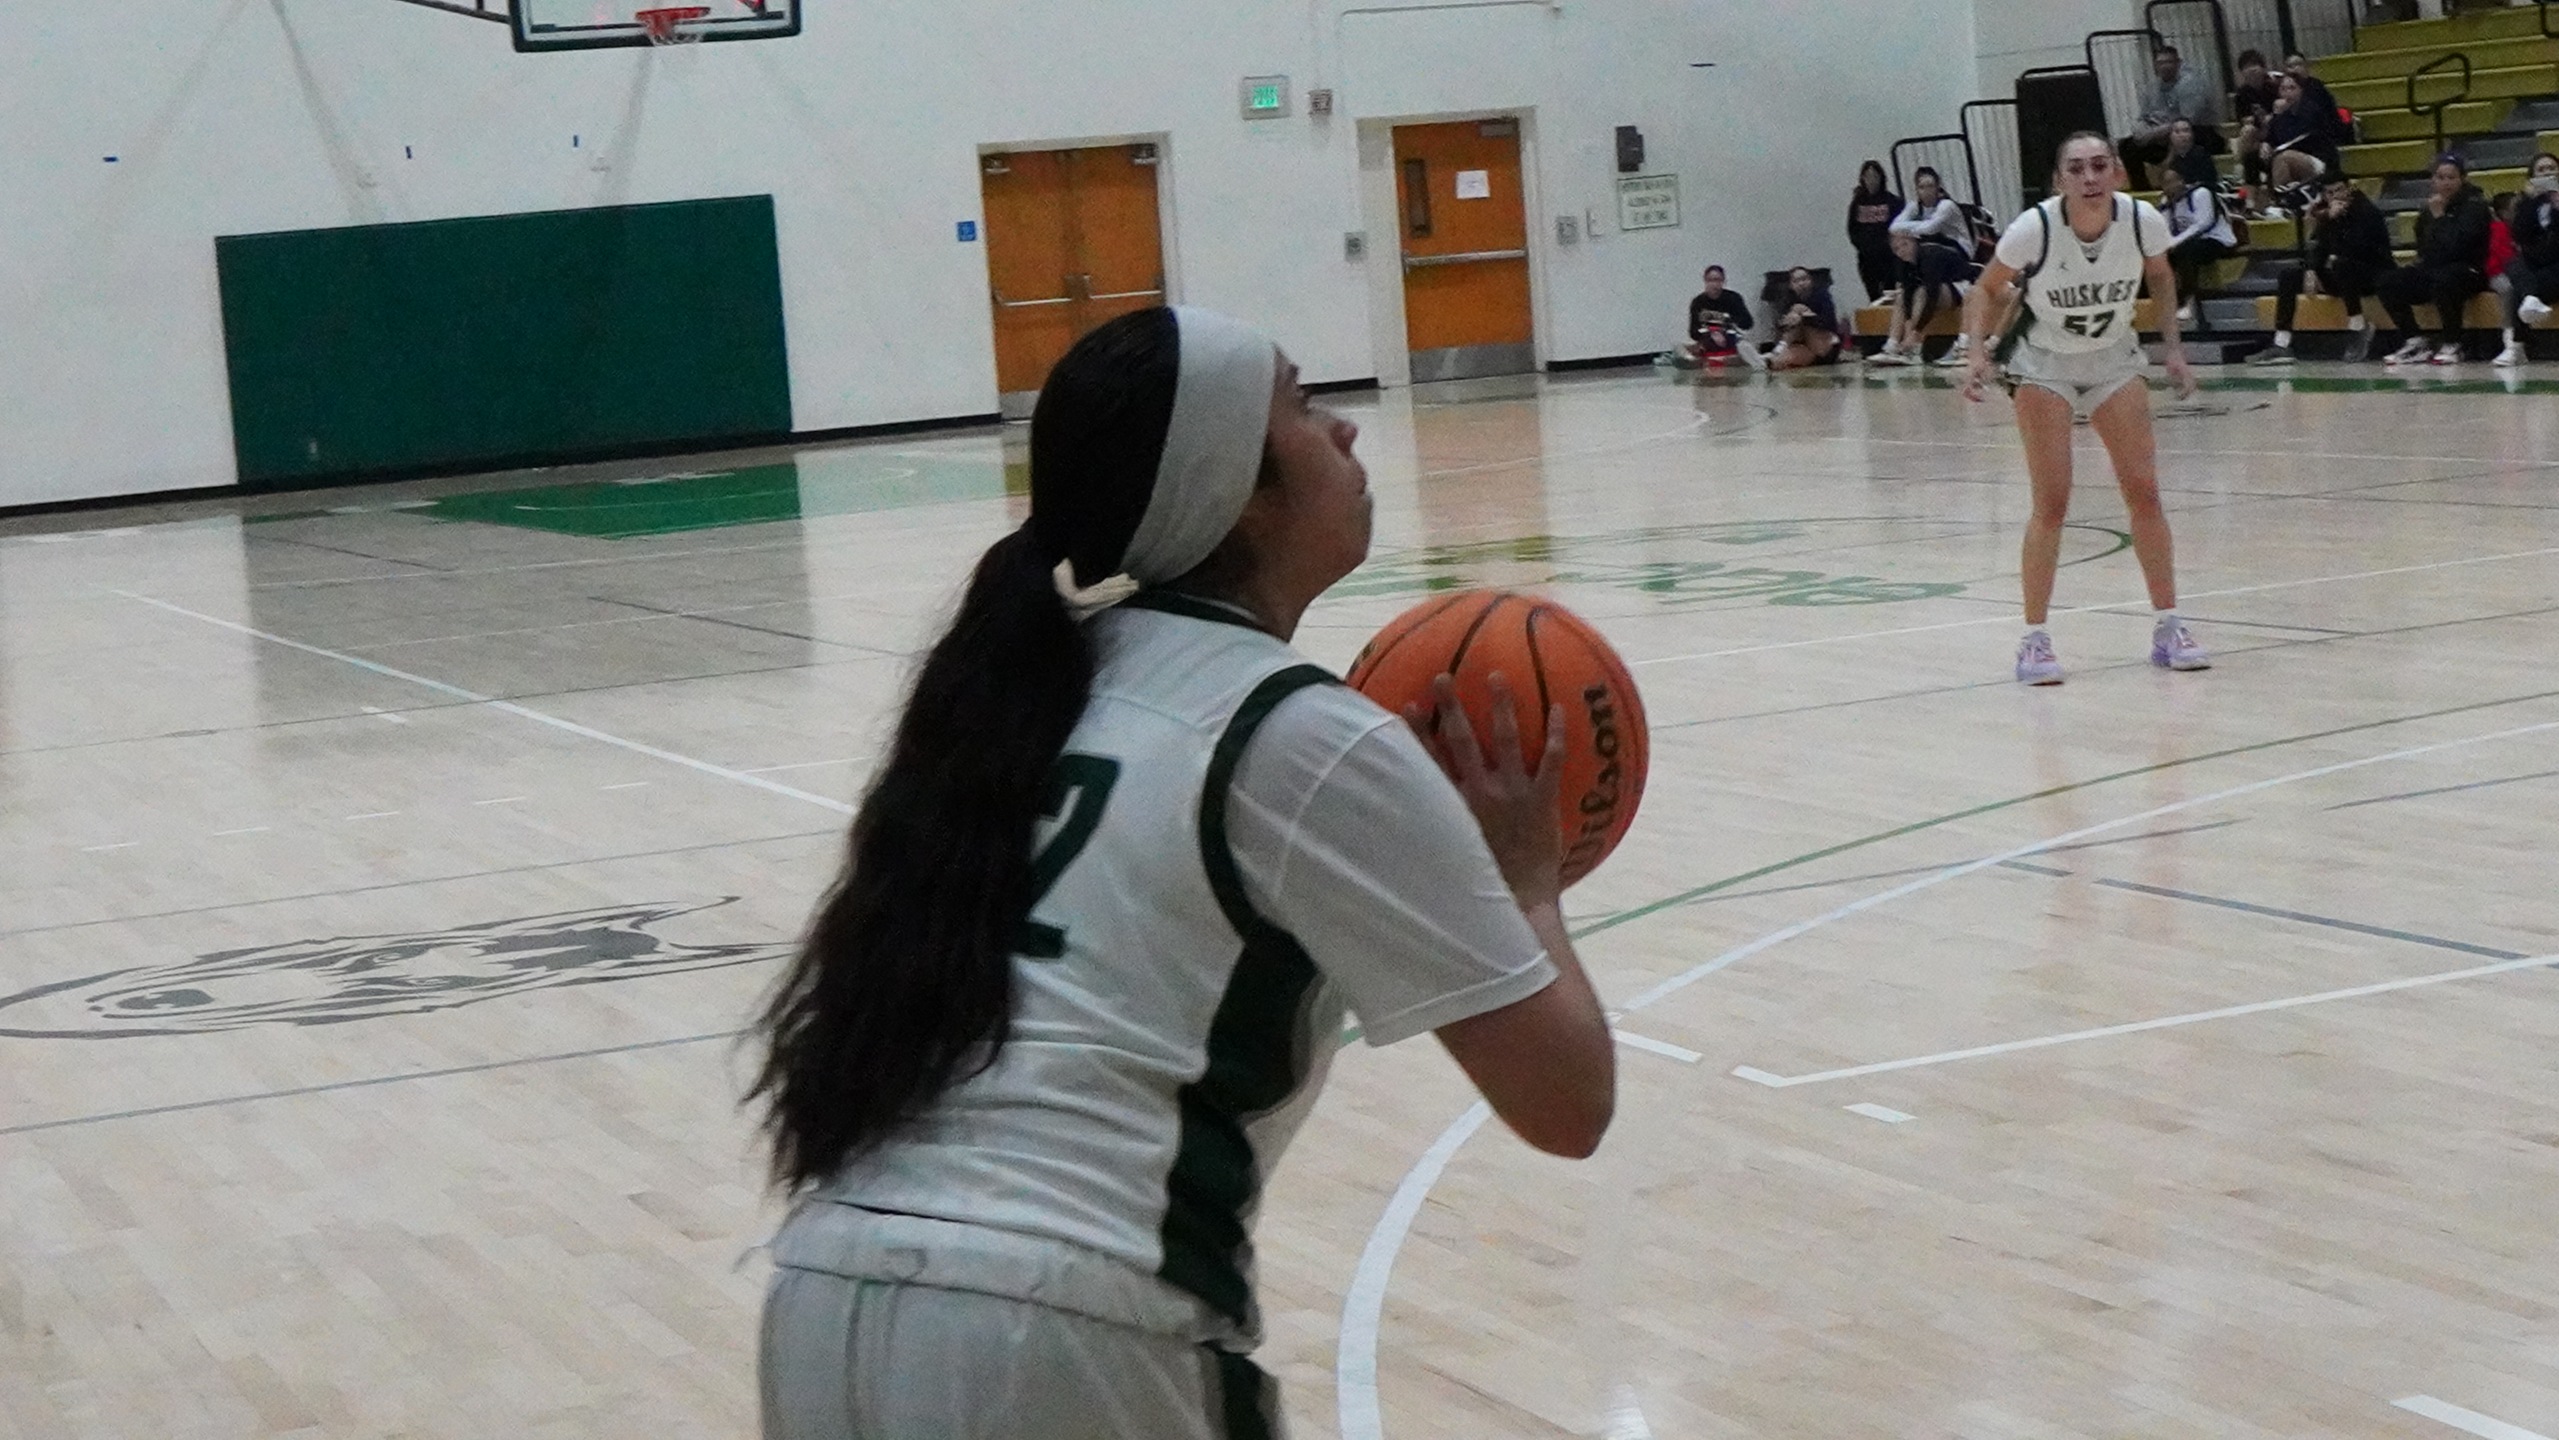 Martinez lines up to shoot her game-sealing three-pointer.